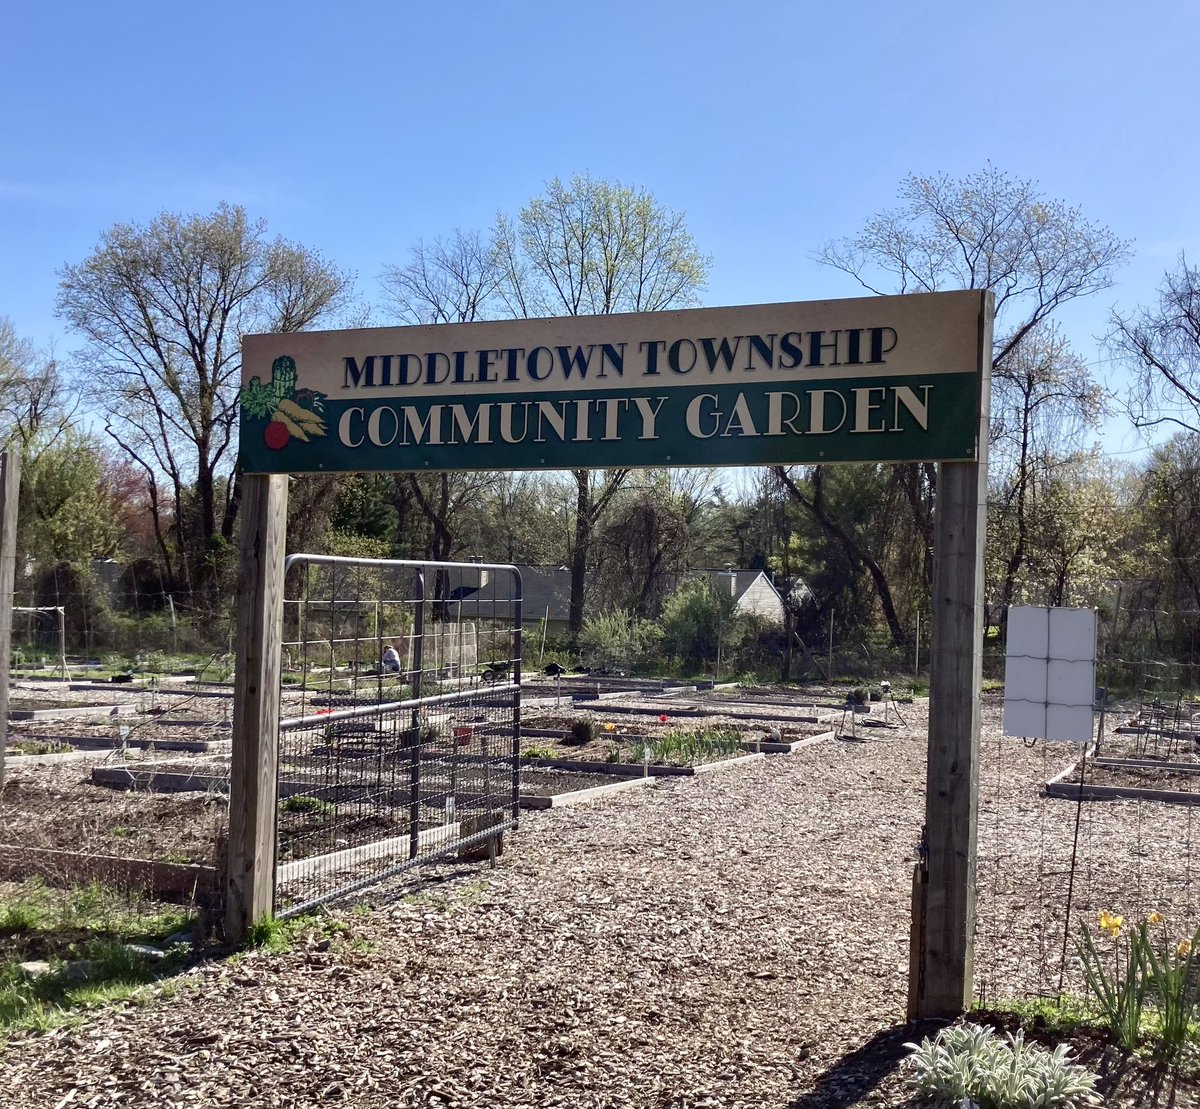 🧑‍🌾 The plots for the Middletown Township Community Garden's 2024 season are SOLD OUT! Please email your name, address, and phone number to communitygarden@middletownnj.org if you would like to be placed on a waiting list for 2025.
 
📸: Middletown Community Gardener Barbara Ely